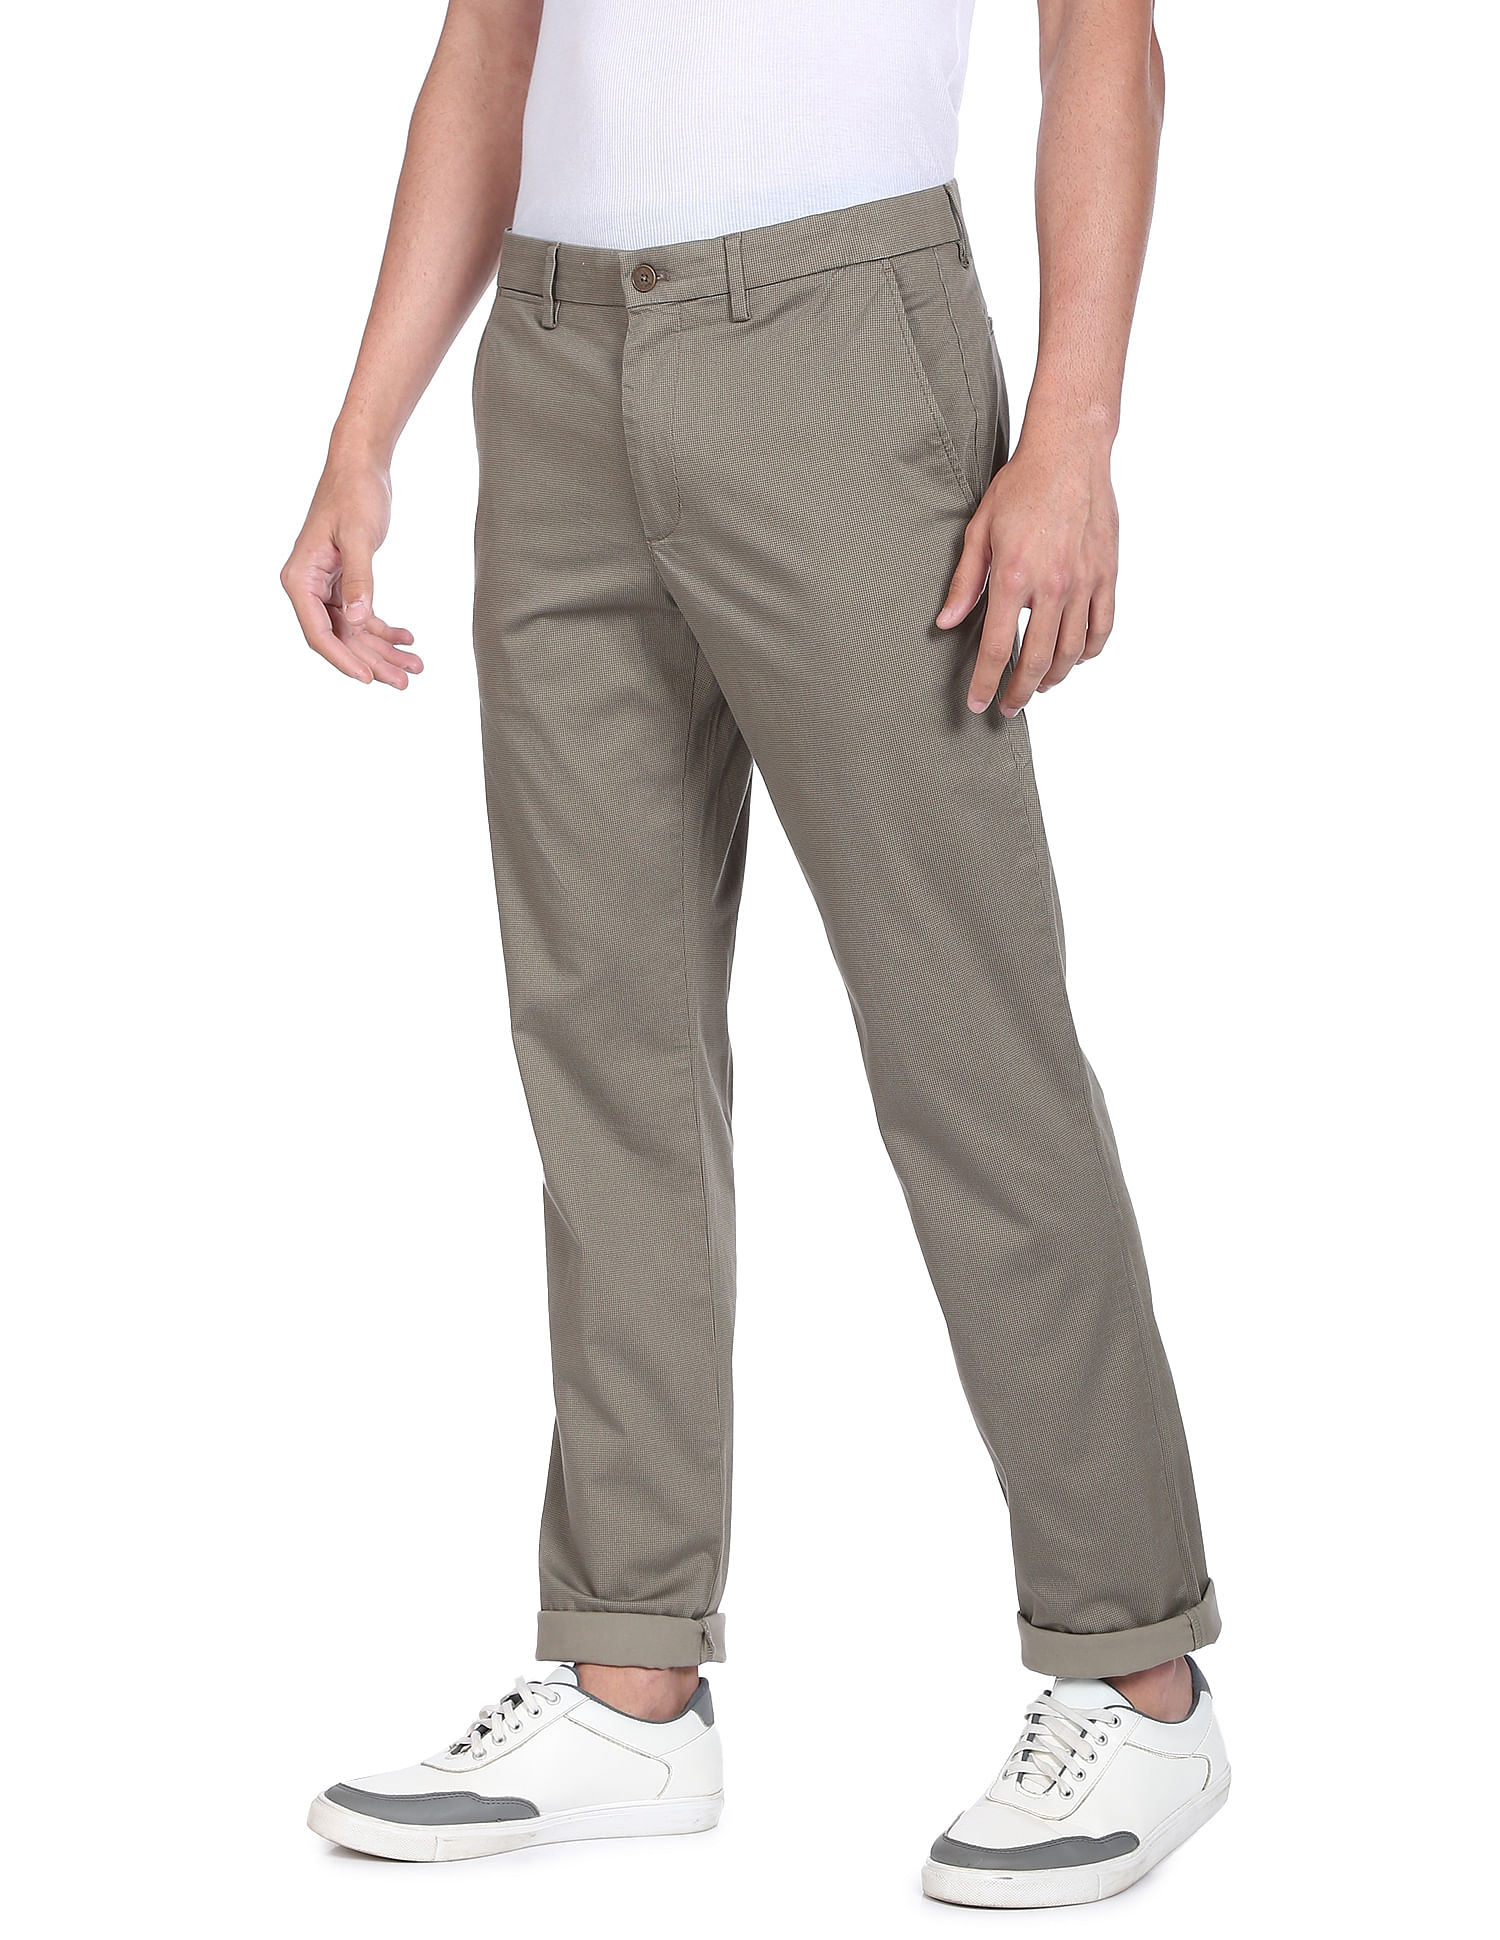 Micro check trousers  Indigos downtown